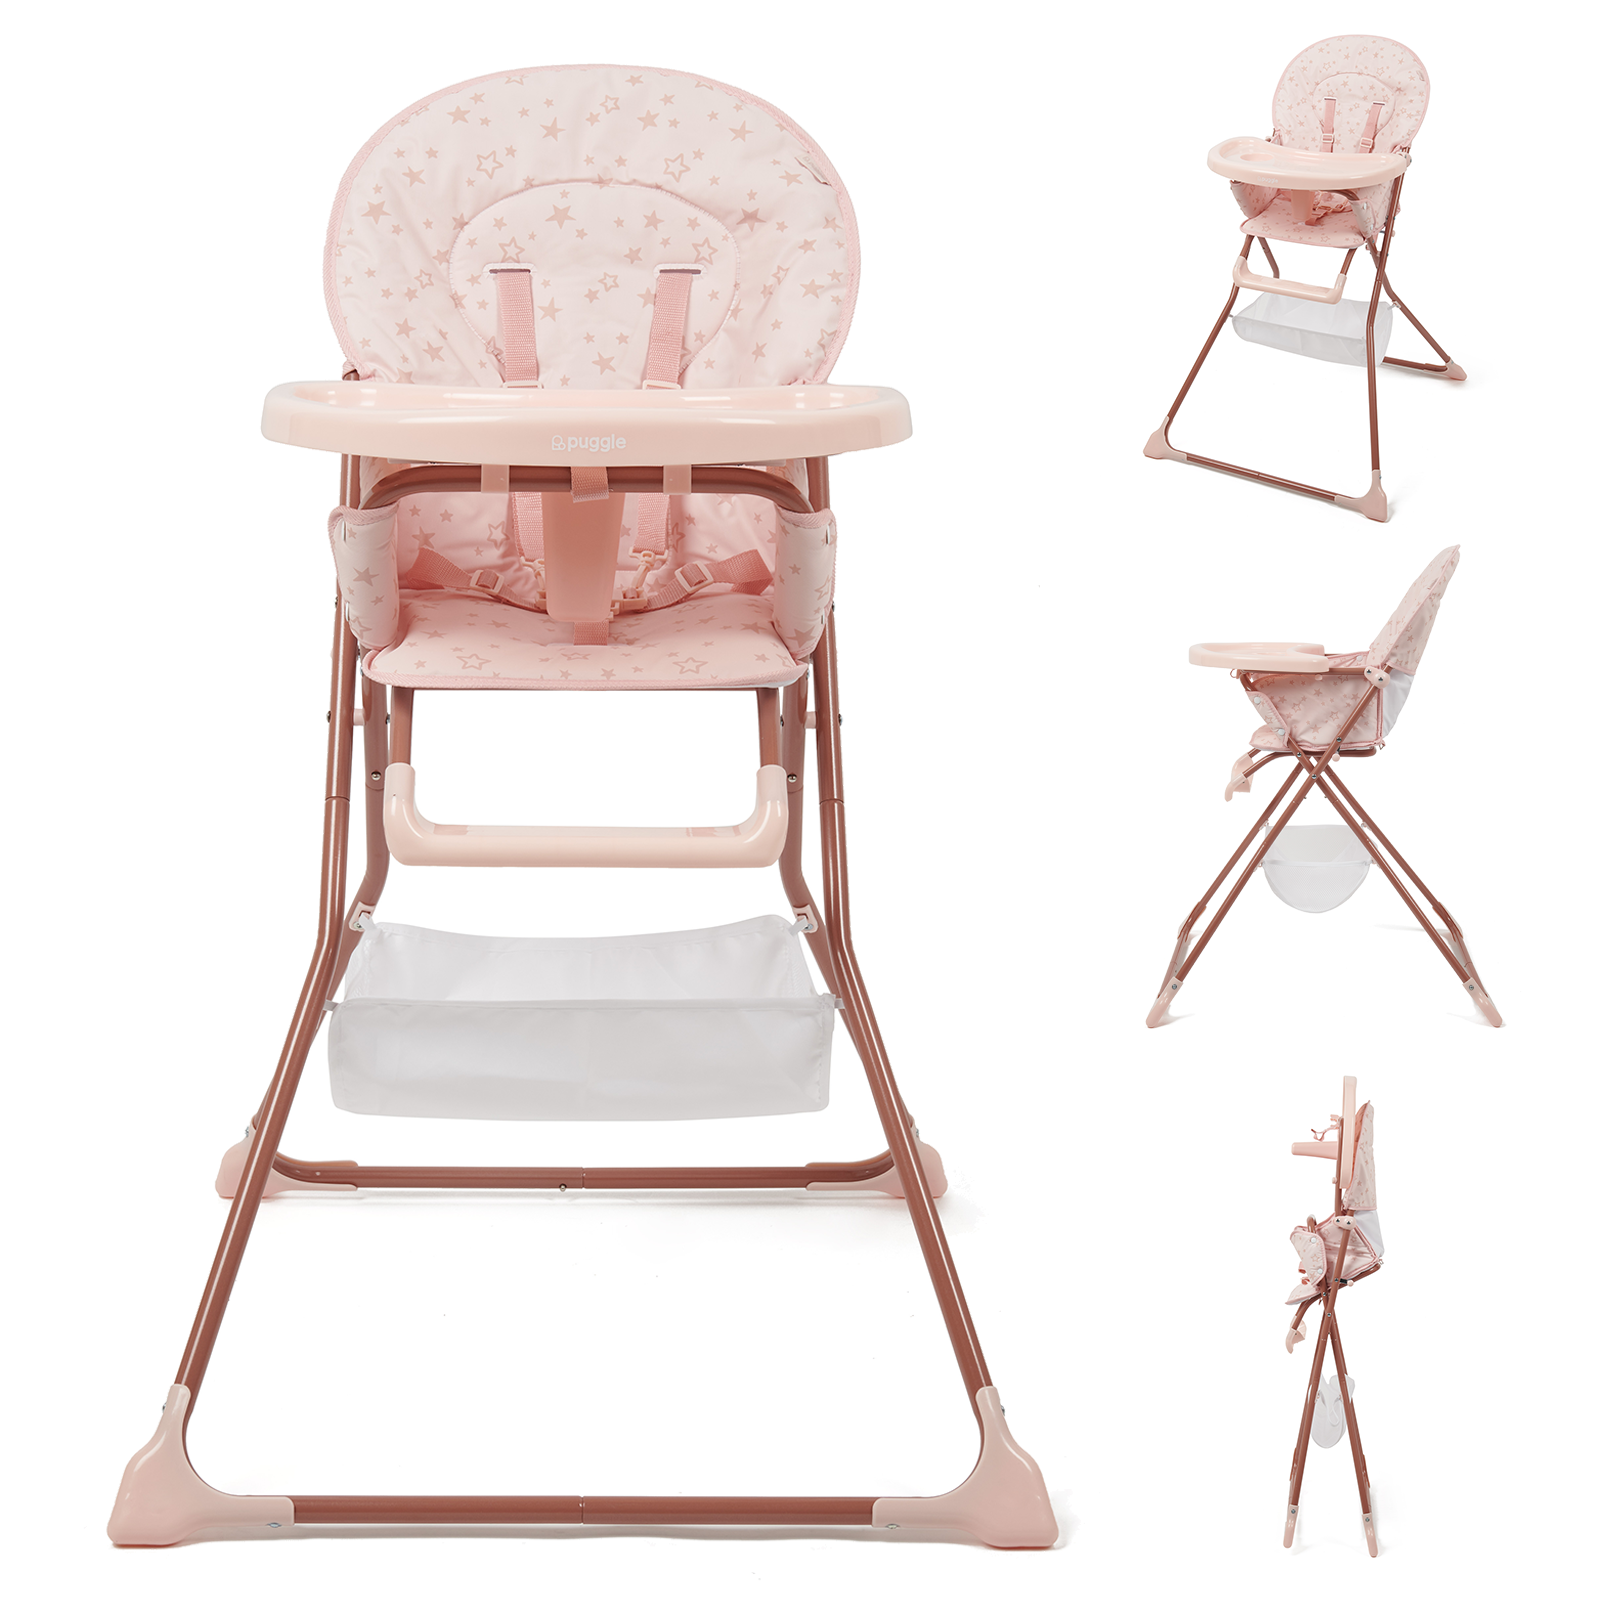 Puggle Dine & Go Luxe Baby Highchair - Scattered Stars Pink